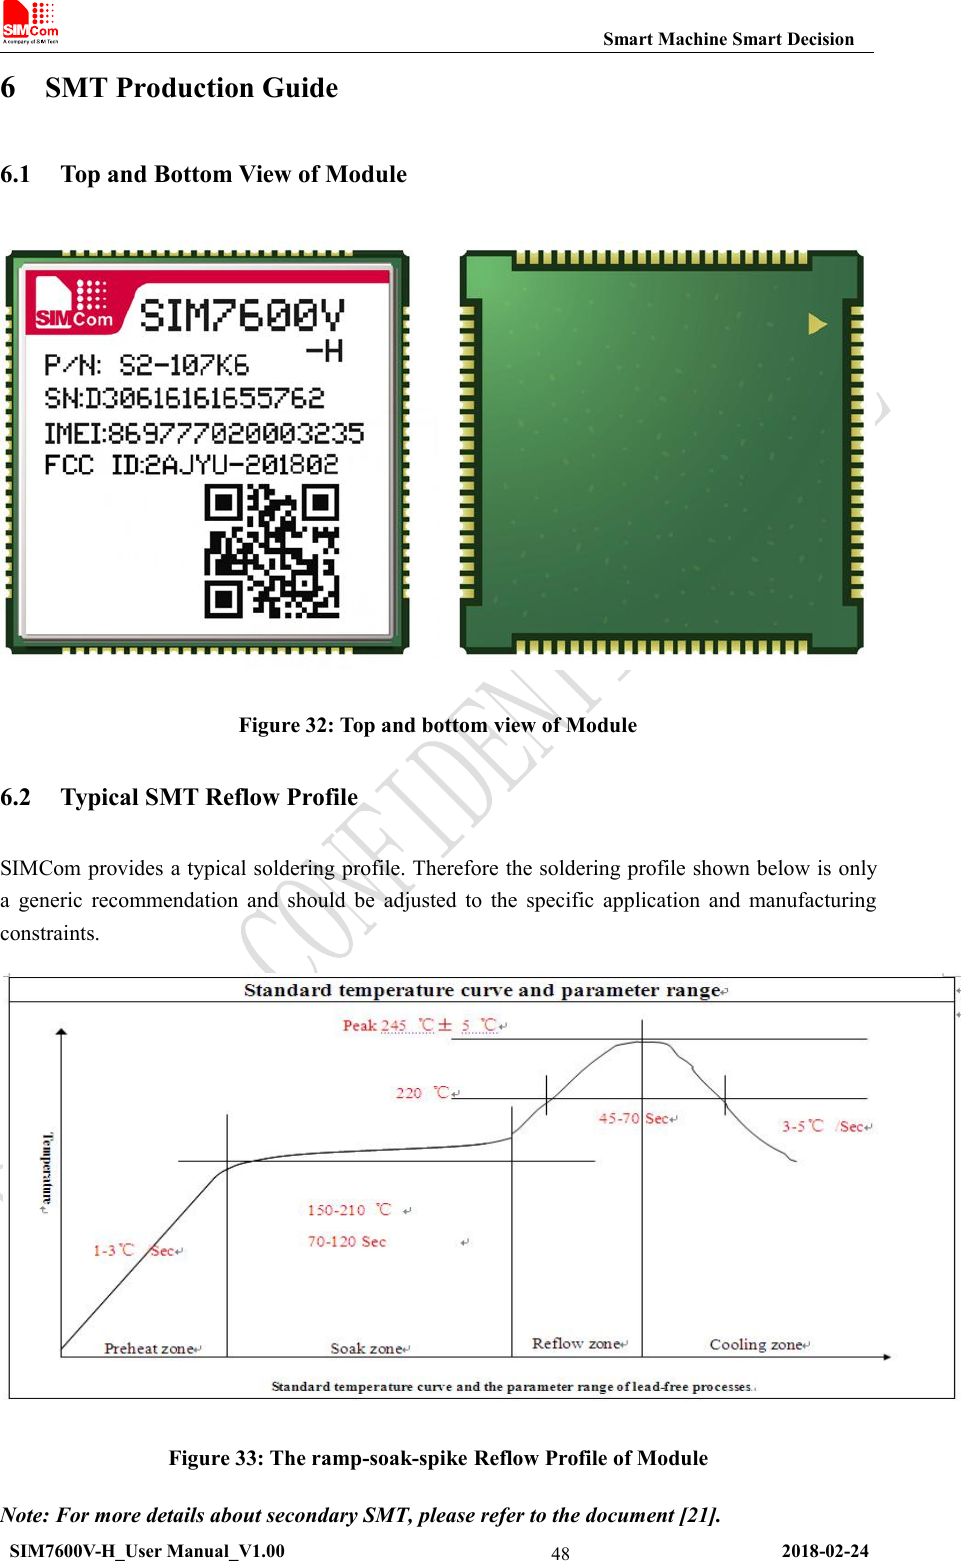 Smart Machine Smart DecisionSIM7600V-H_User Manual_V1.00 2018-02-24486SMT Production Guide6.1 Top and Bottom View of ModuleFigure 32: Top and bottom view of Module6.2 Typical SMT Reflow ProfileSIMCom provides a typical soldering profile. Therefore the soldering profile shown below is onlya generic recommendation and should be adjusted to the specific application and manufacturingconstraints.Figure 33: The ramp-soak-spike Reflow Profile of ModuleNote: For more details about secondary SMT, please refer to the document [21].